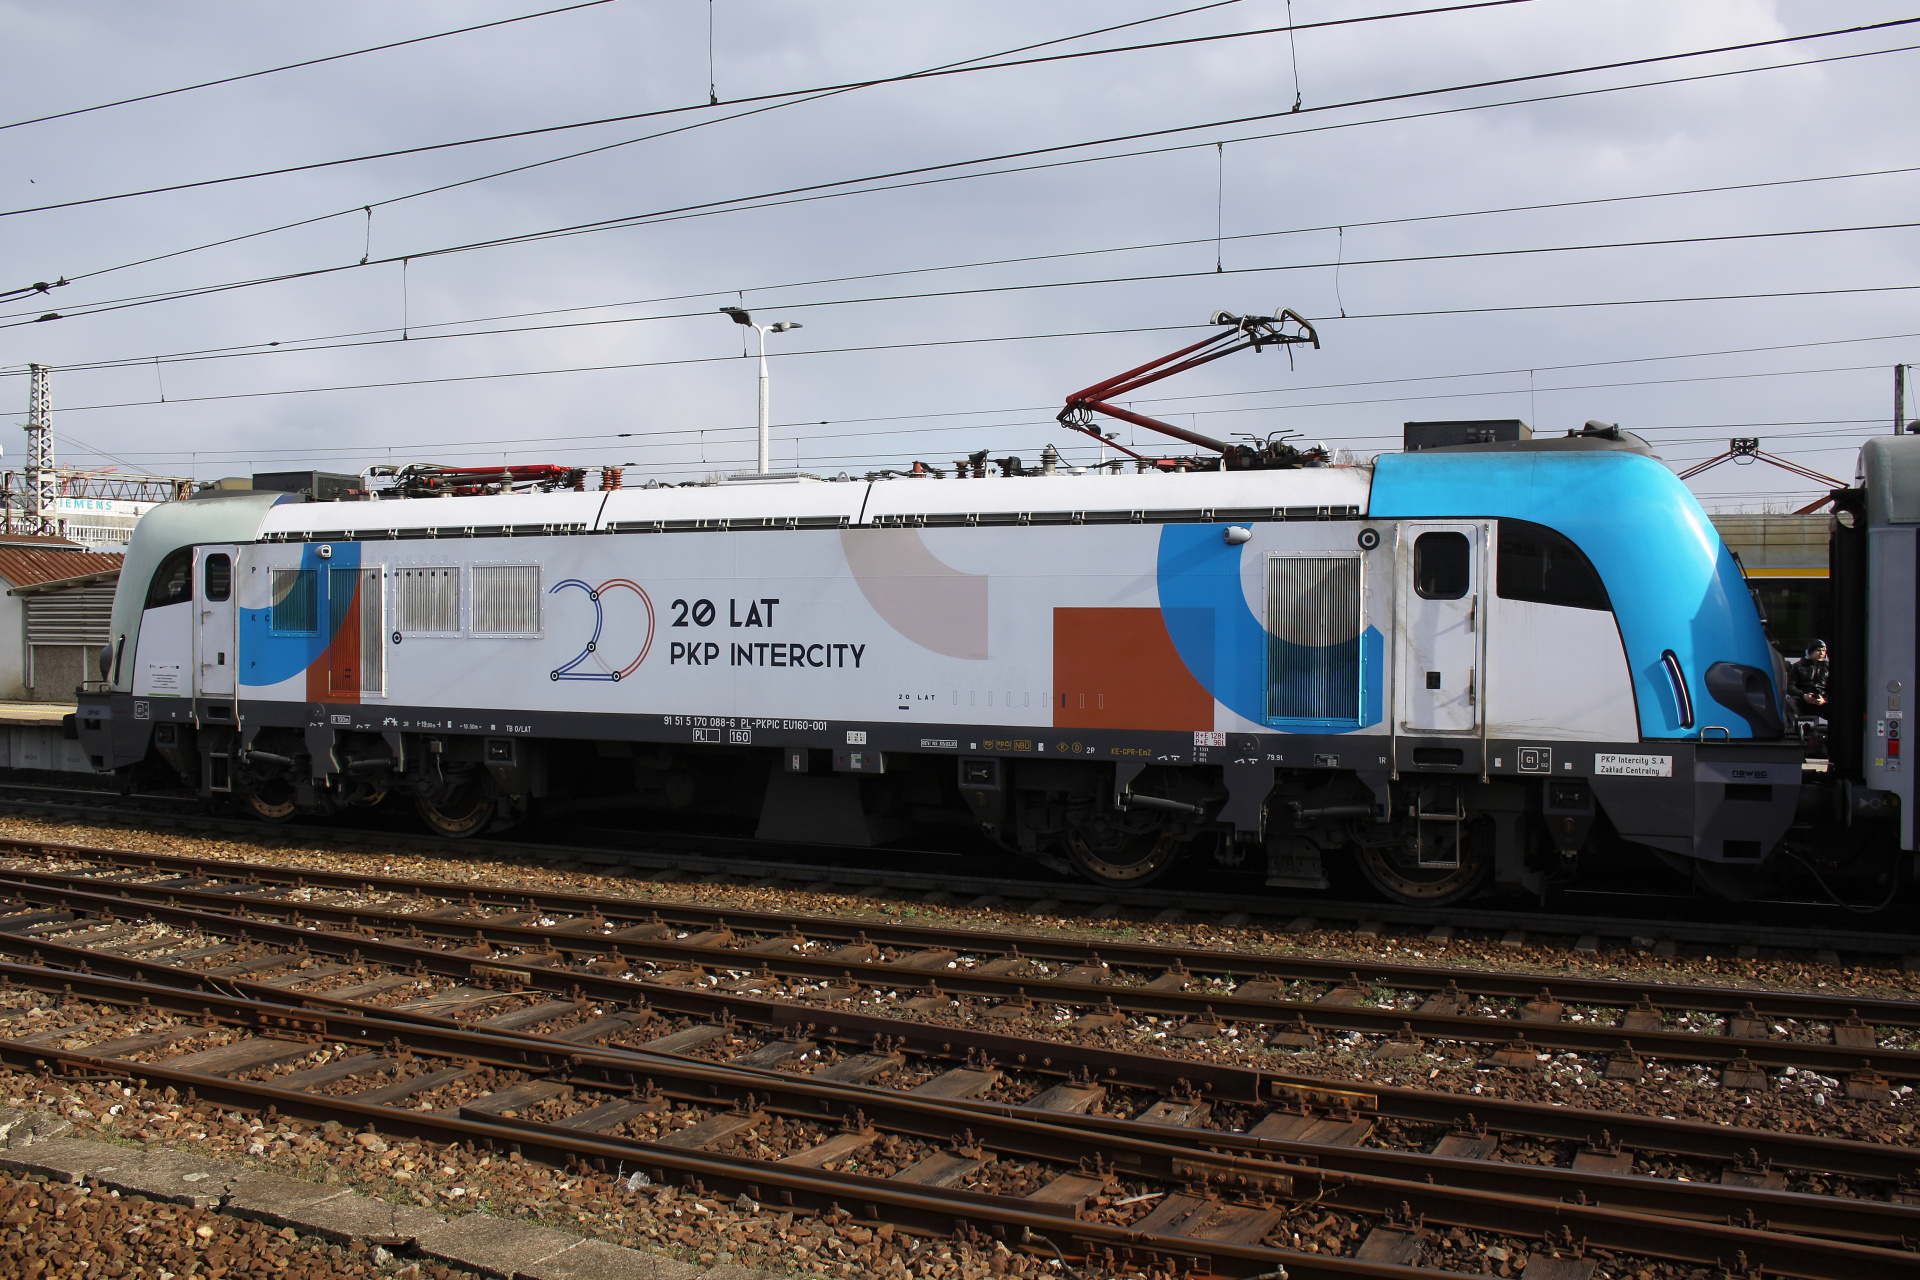 E4DCU EU160-001 (20 Years of PKP Intercity livery) (Vehicles » Trains and Locomotives » Newag Griffin)